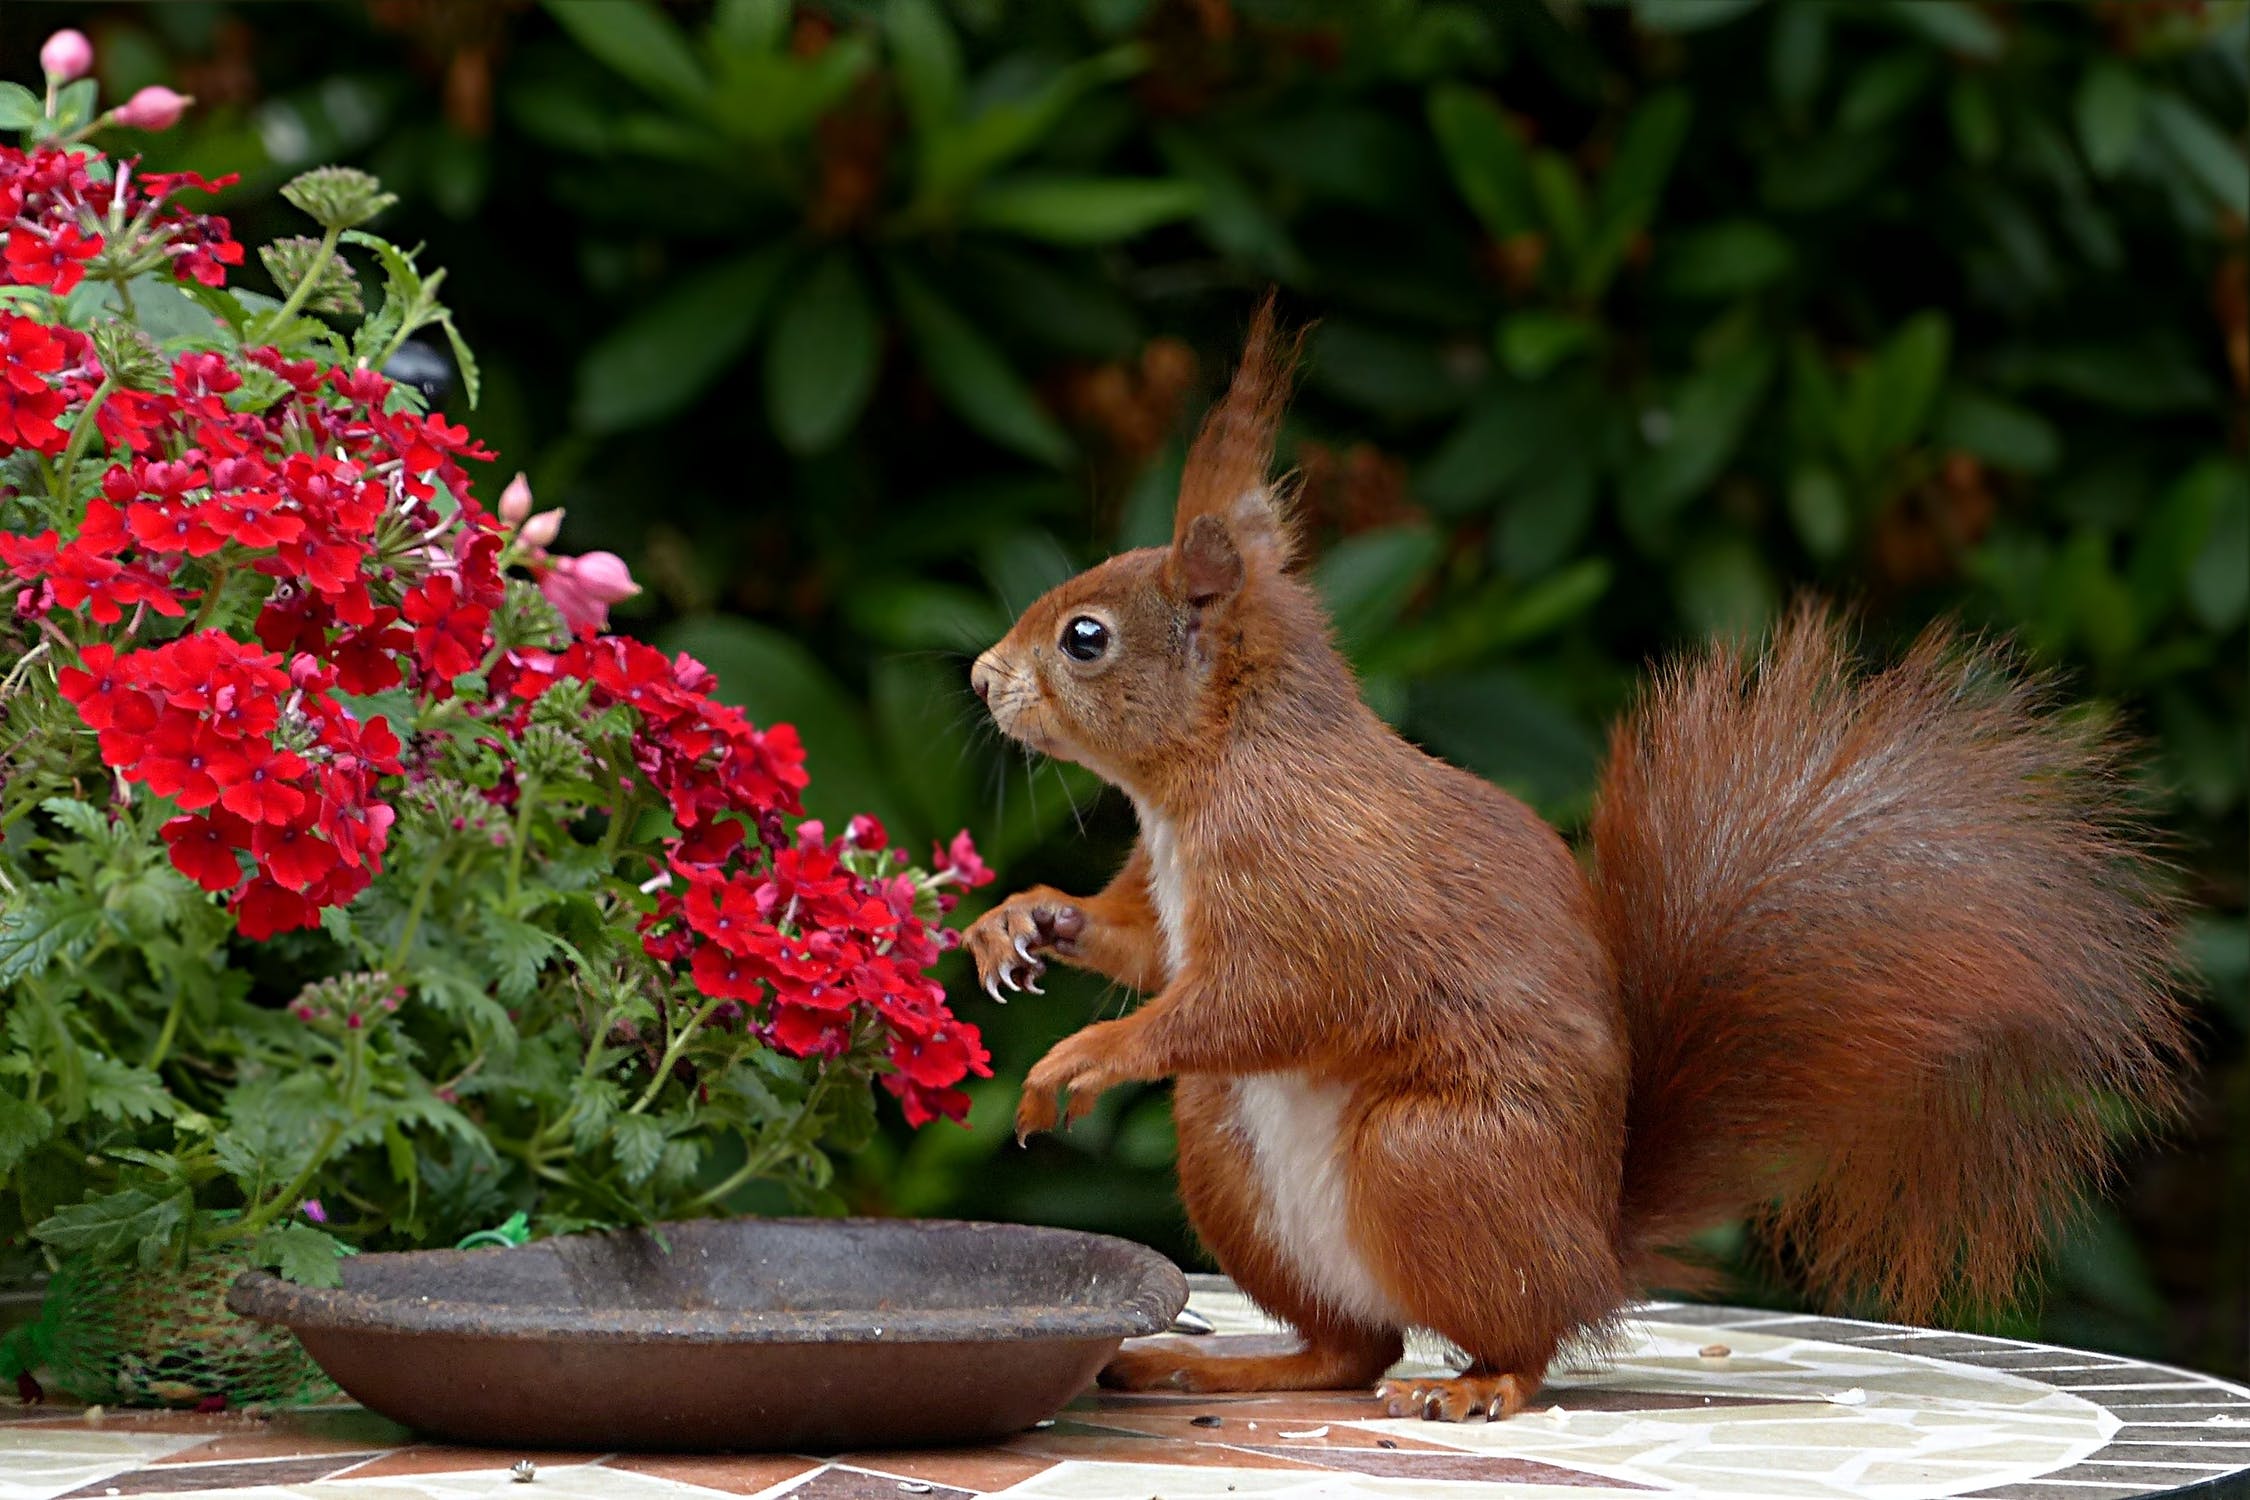 Red flowers and a squirrel sat beside them